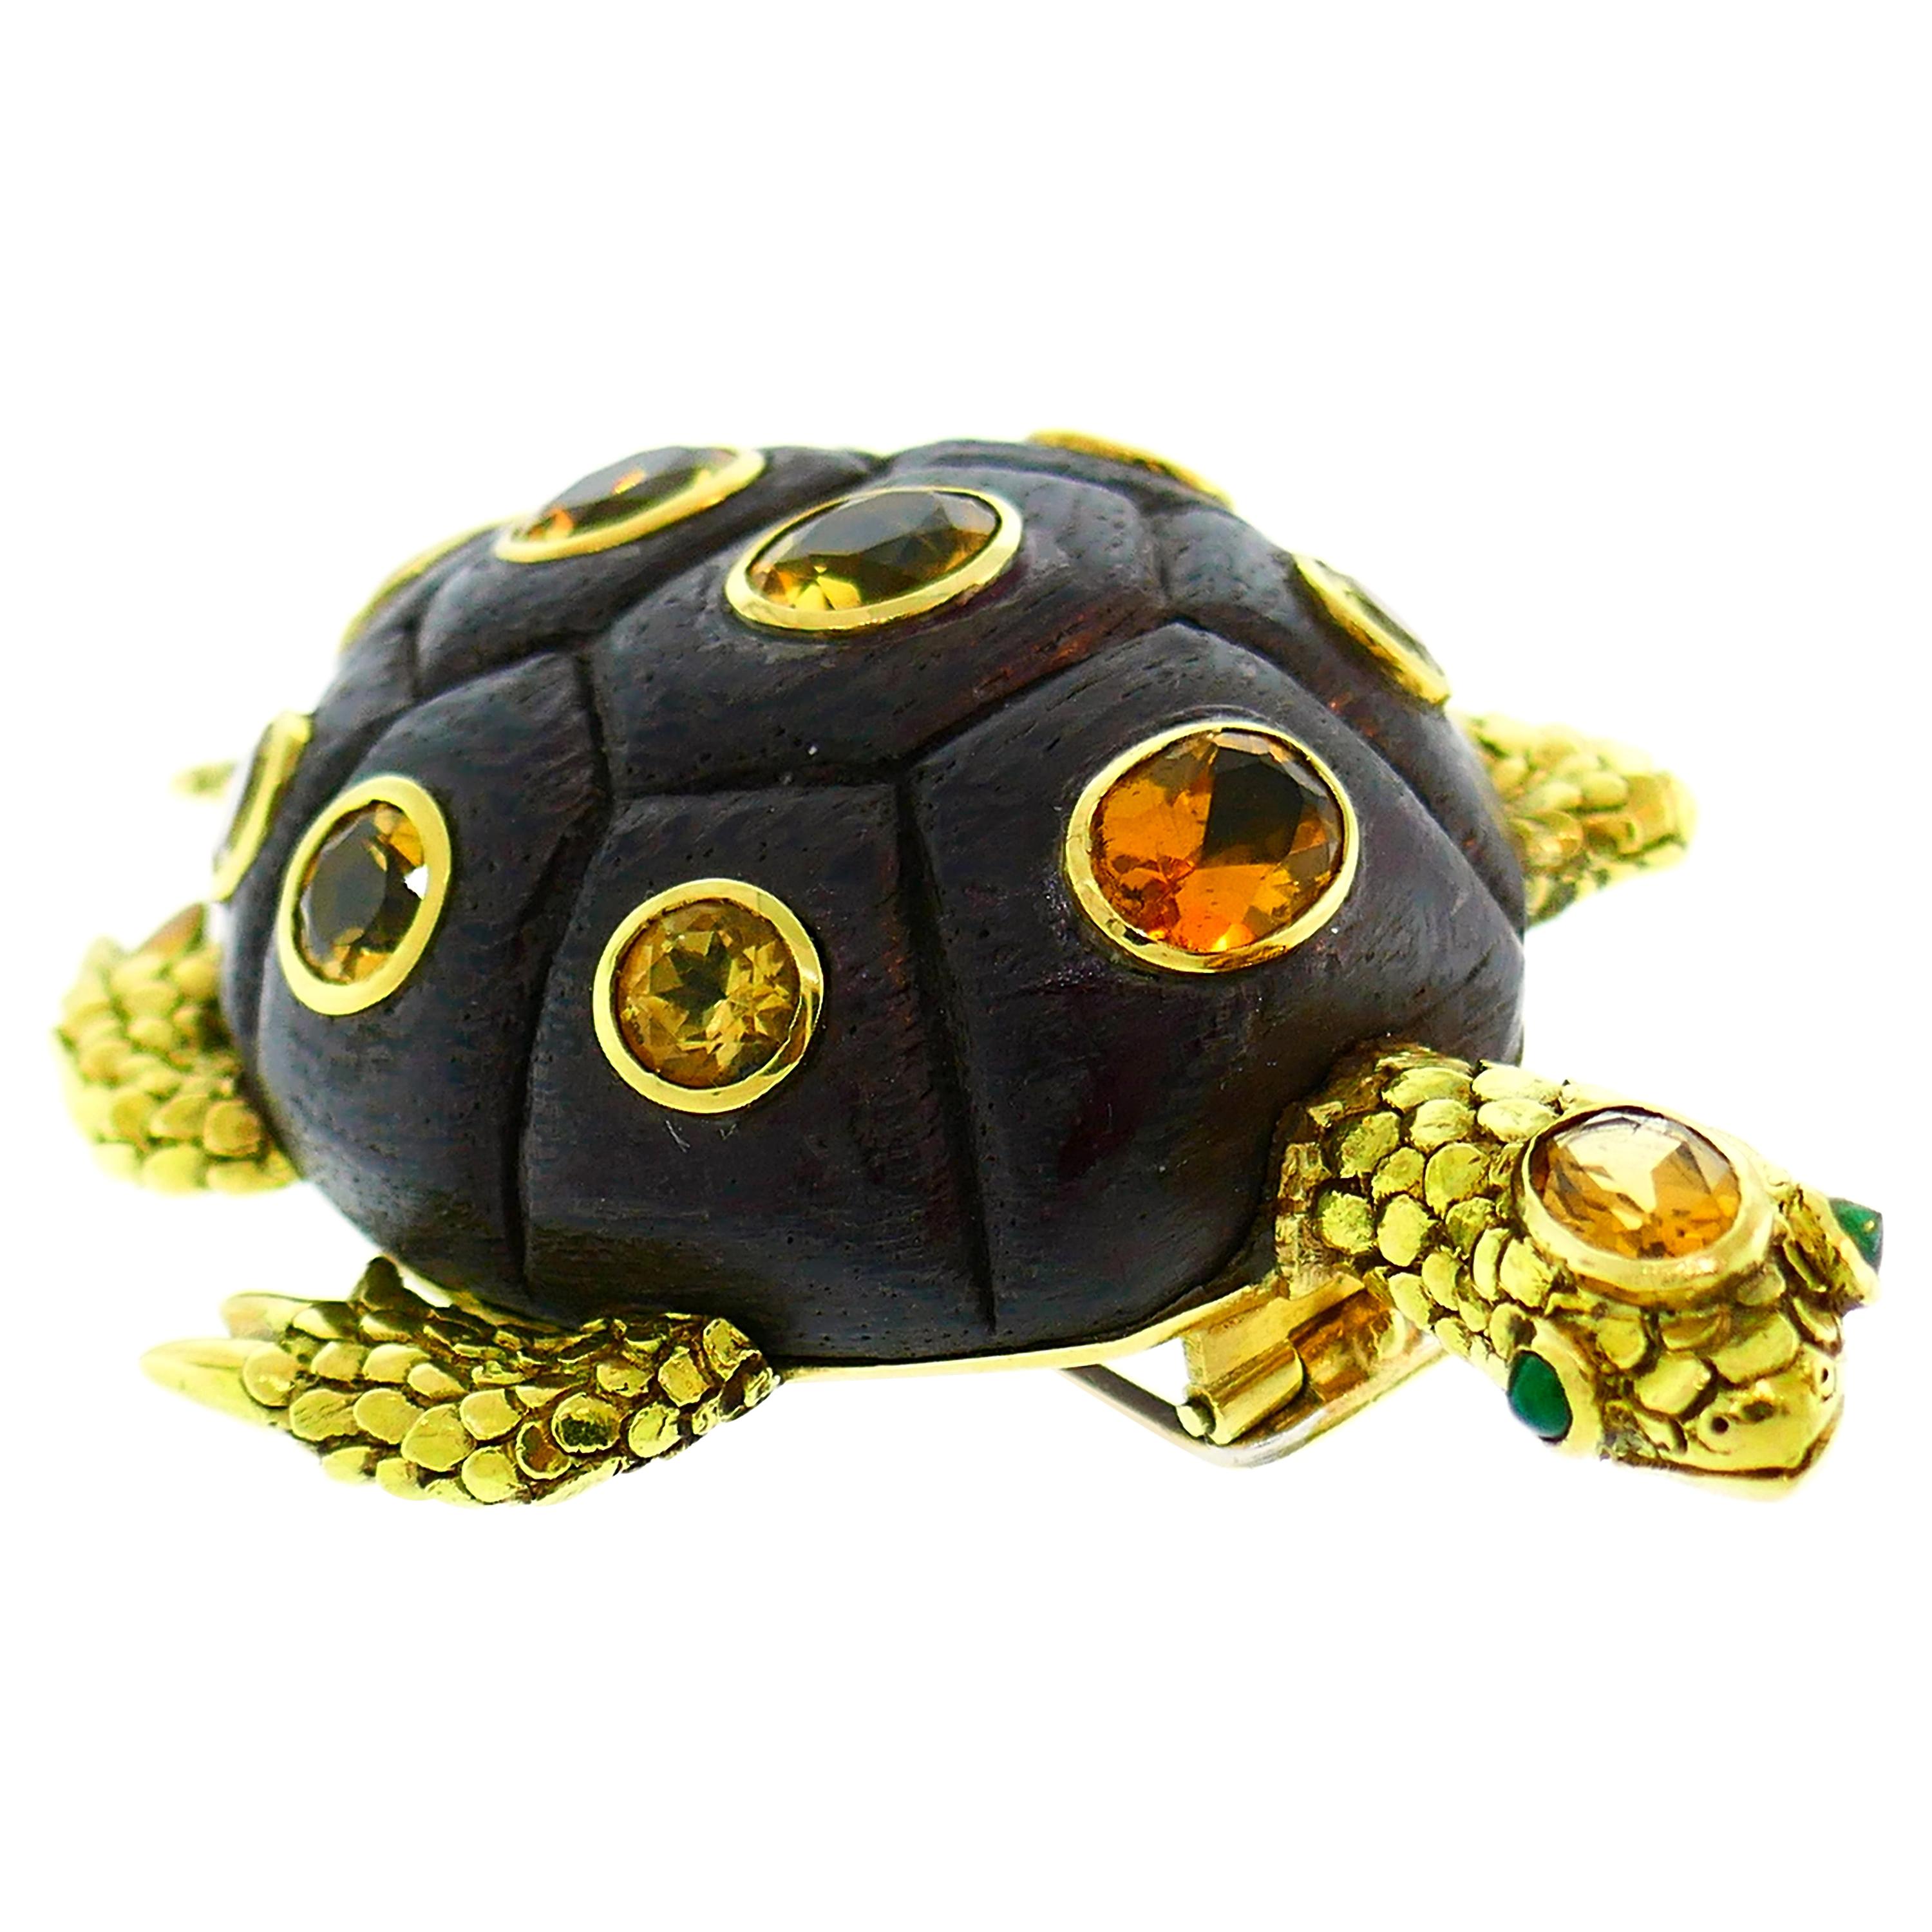 Seaman Schepps Yellow Gold Turtle Clip Brooch Pin with Citrine and Wood